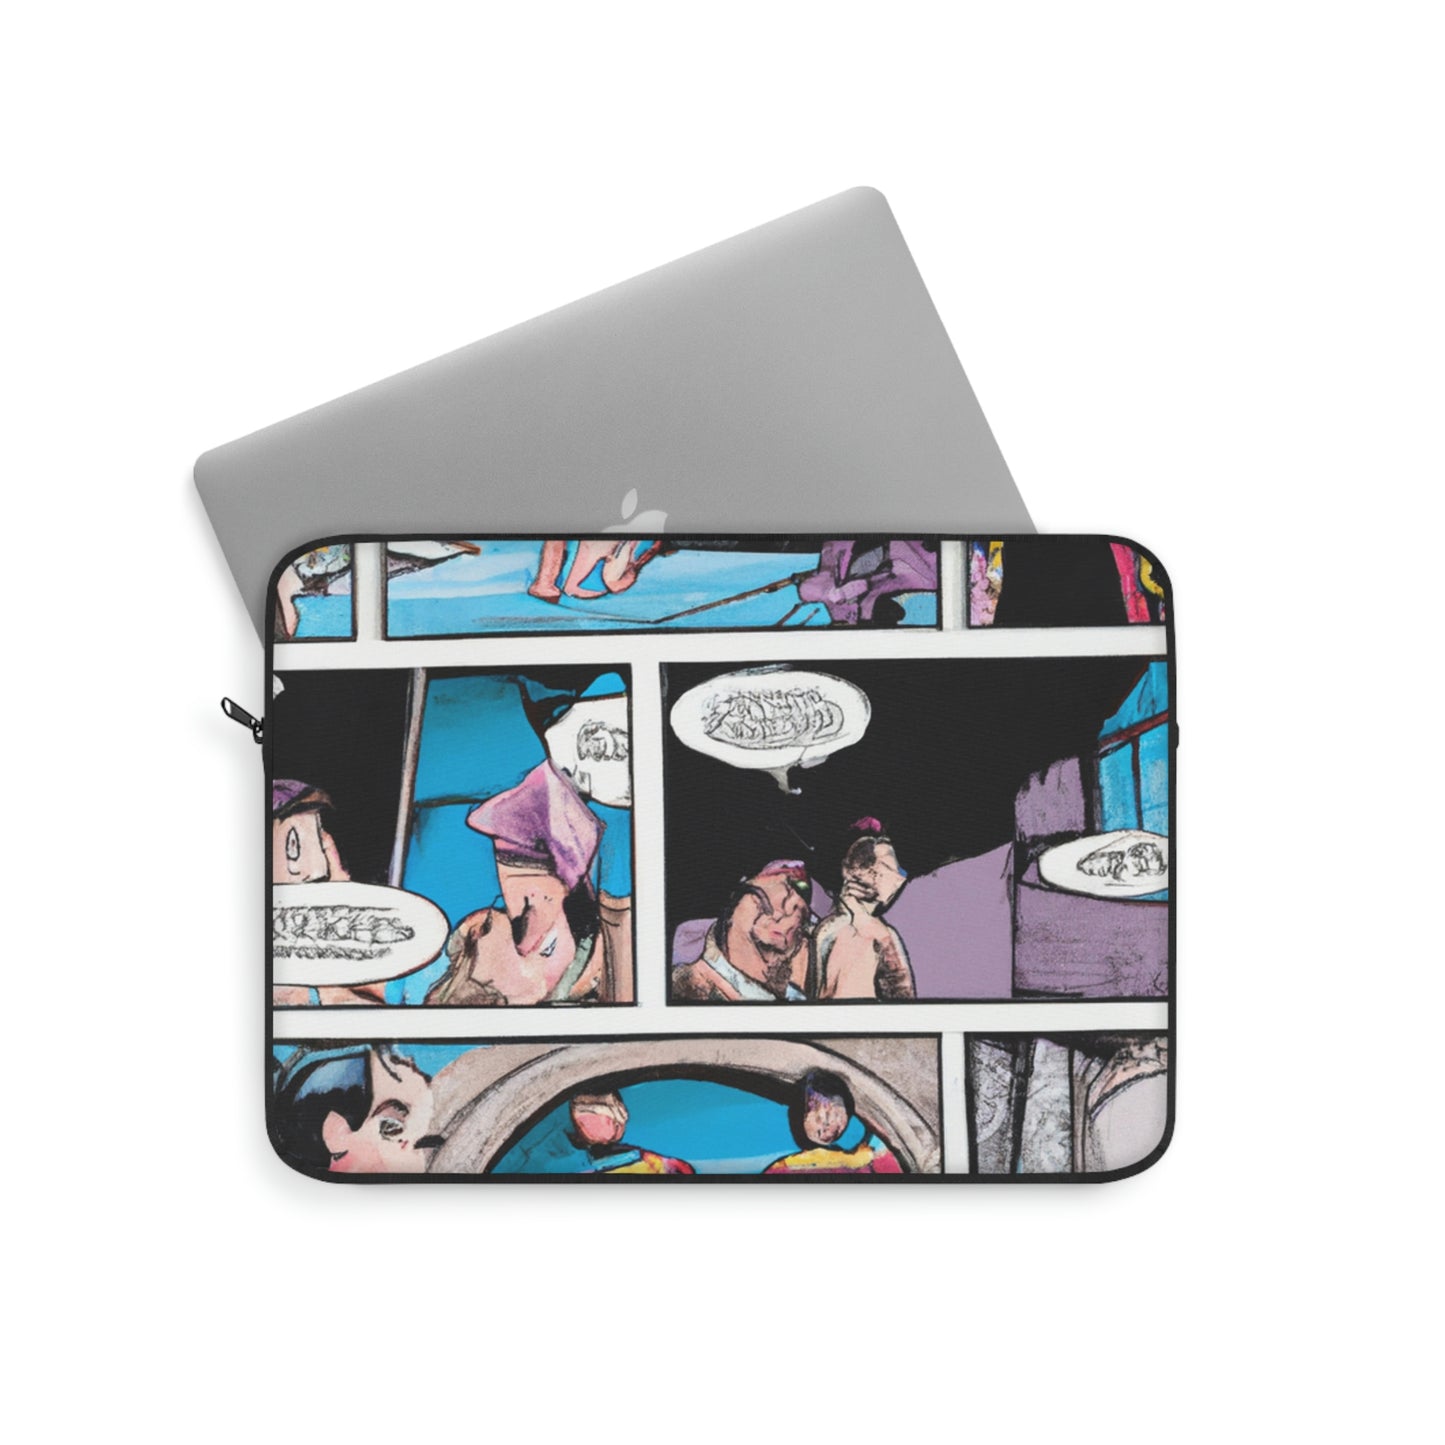 Lenny the Lonesome Cowboy. - Comic Book Collector Laptop Computer Sleeve Storage Case Bag